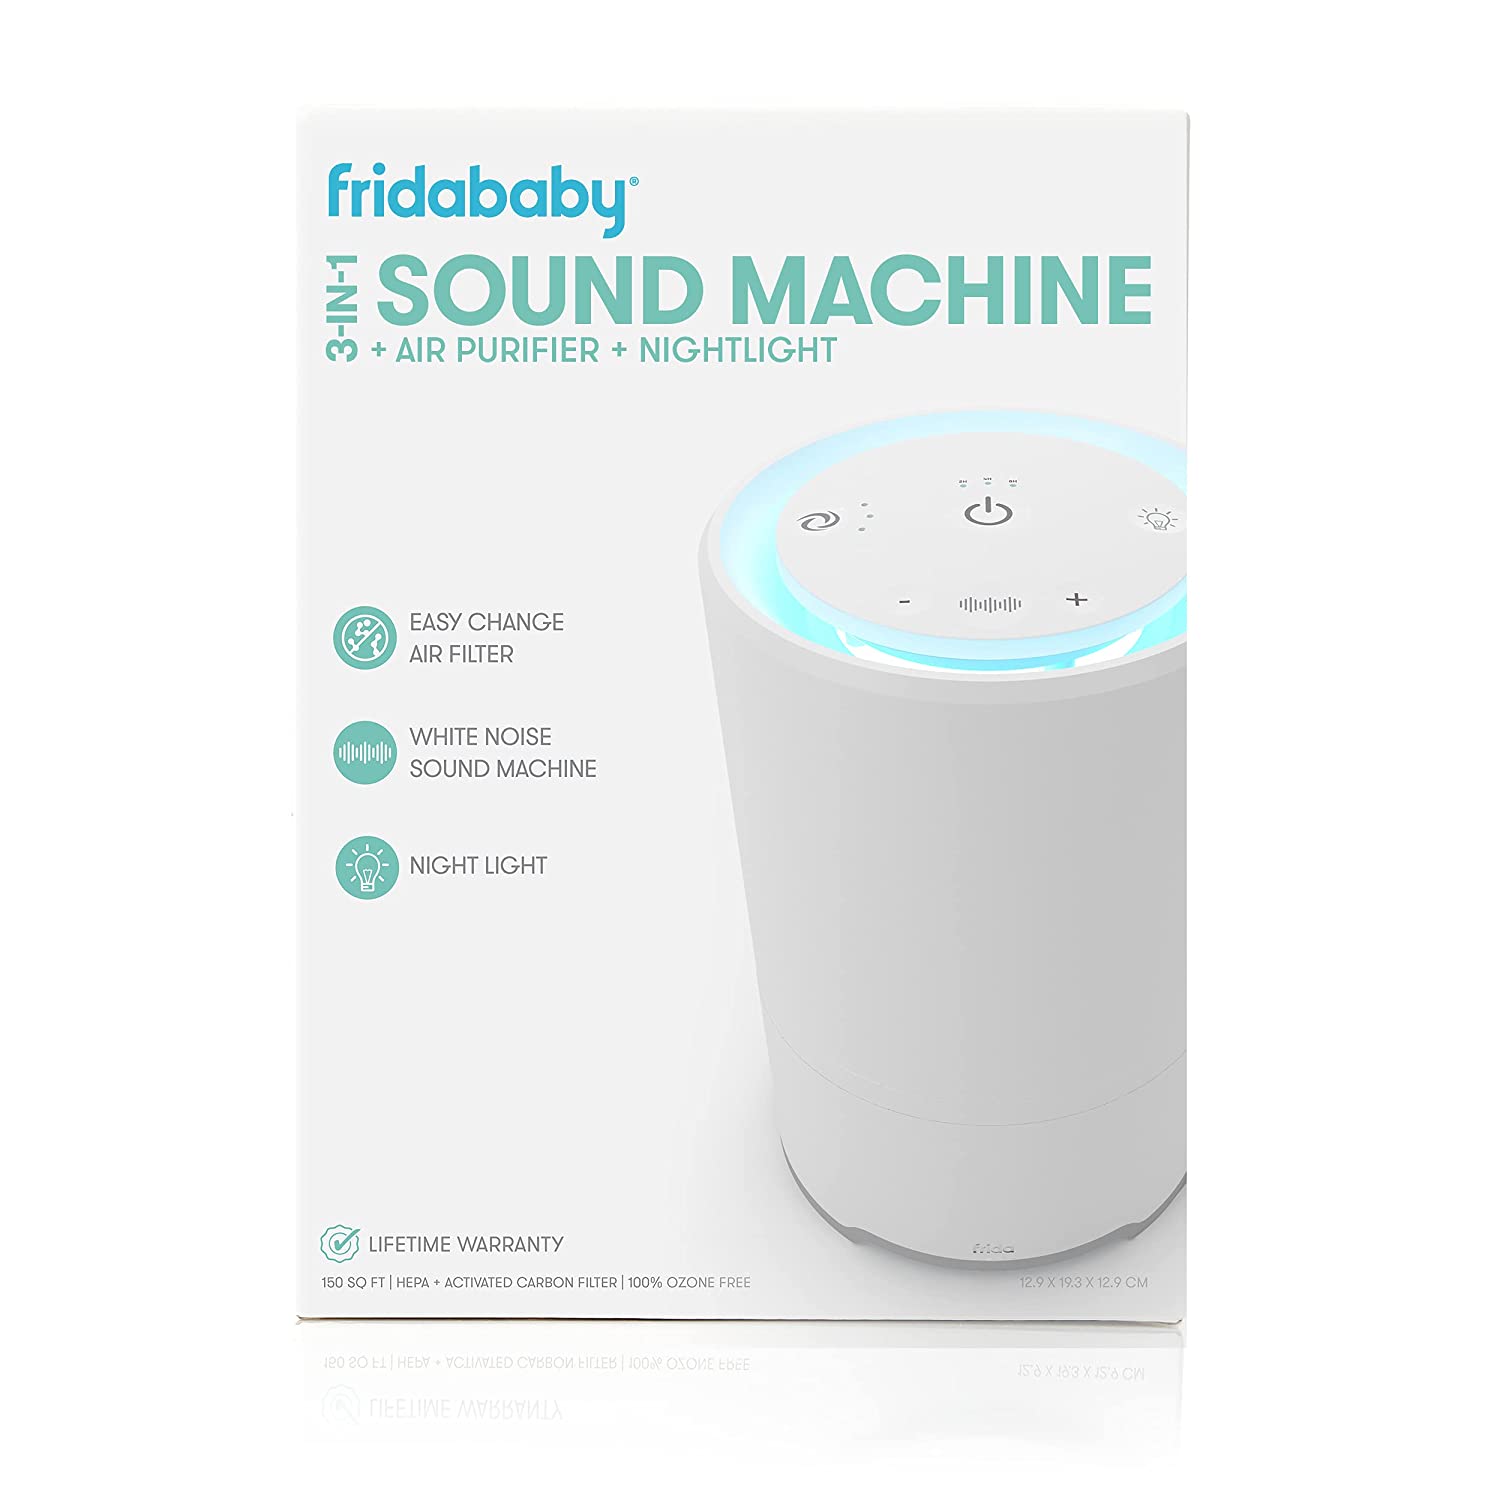 3-in-1 Sound Machine, Air Purifier + Nightlight with 3 Fan Speeds and Easy-Change Filter by Fridababy